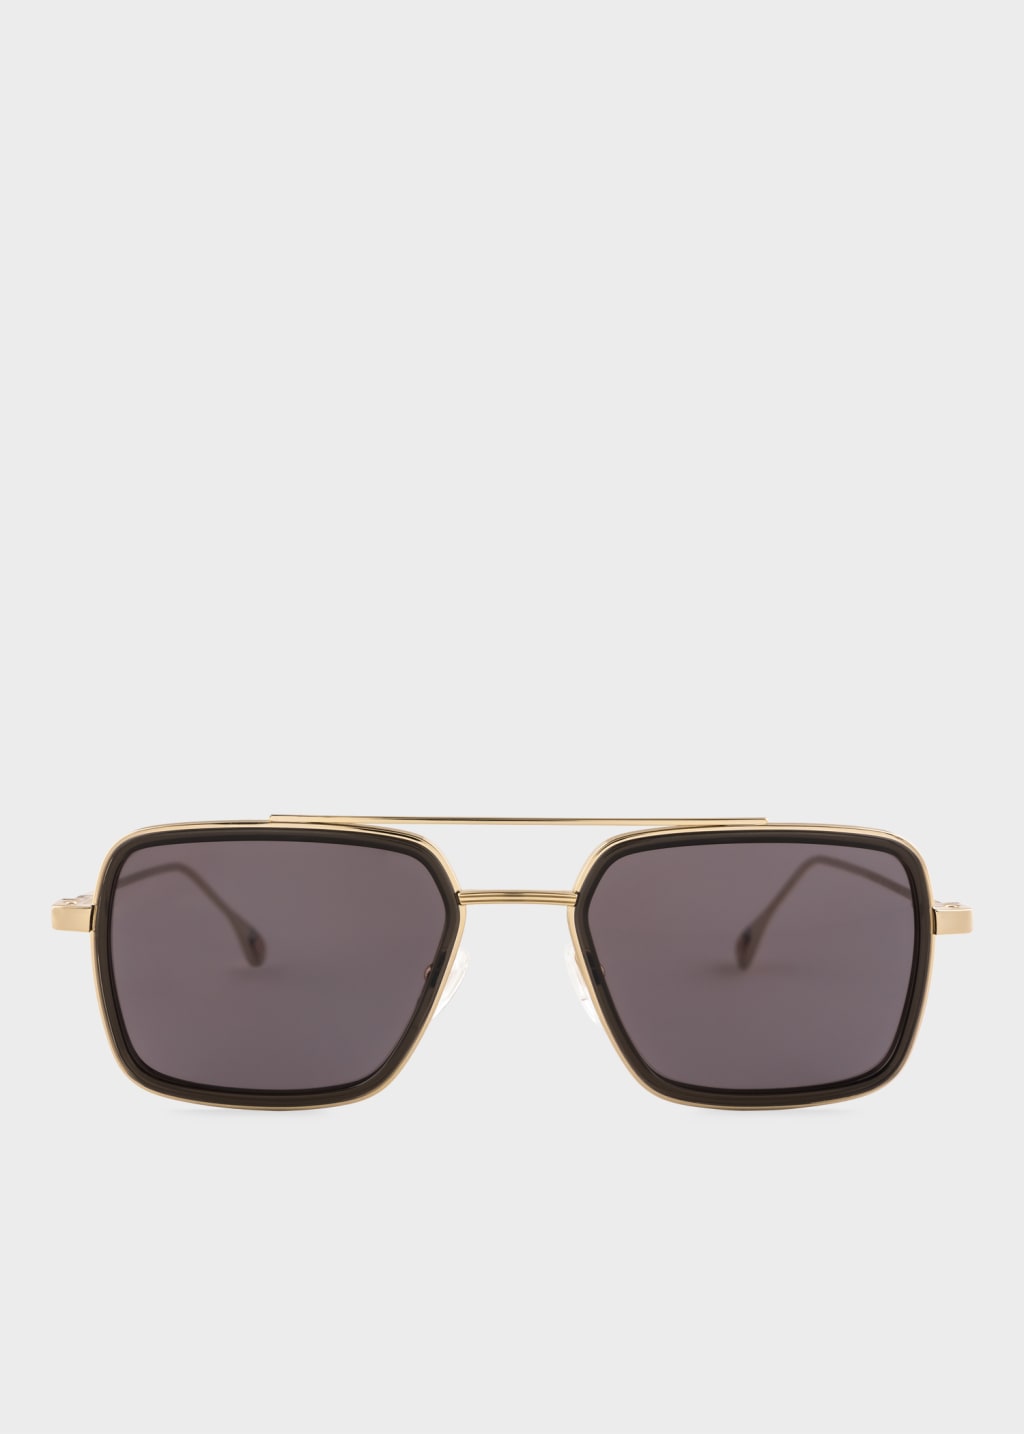 Product view - Gold and Grey 'Hugon' Sunglasses by Paul Smith